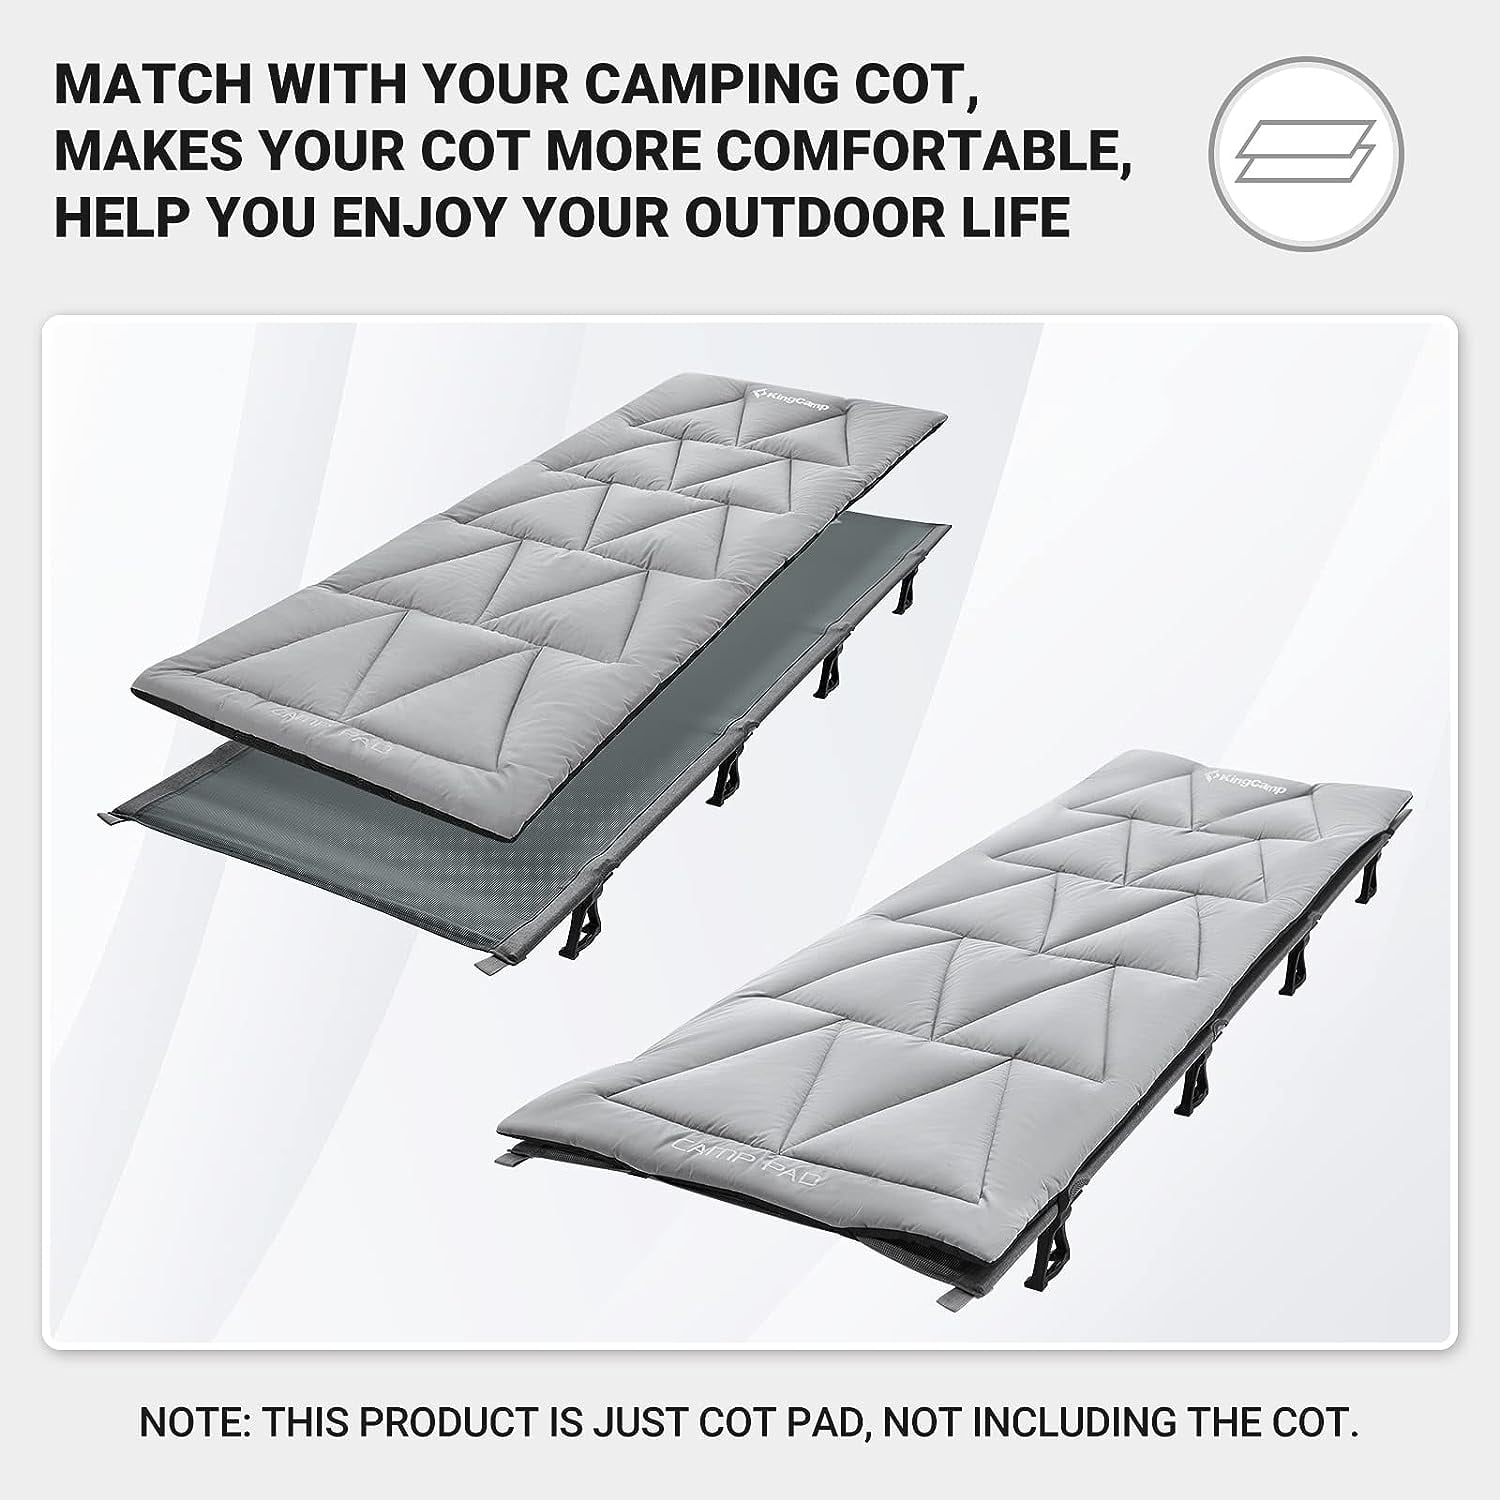 KingCamp Camping Sleeping Cot Mattress Pads for Adult Outdoor Camping Hiking Cot Grey 74.8L x 25.2W, 1.61LBS